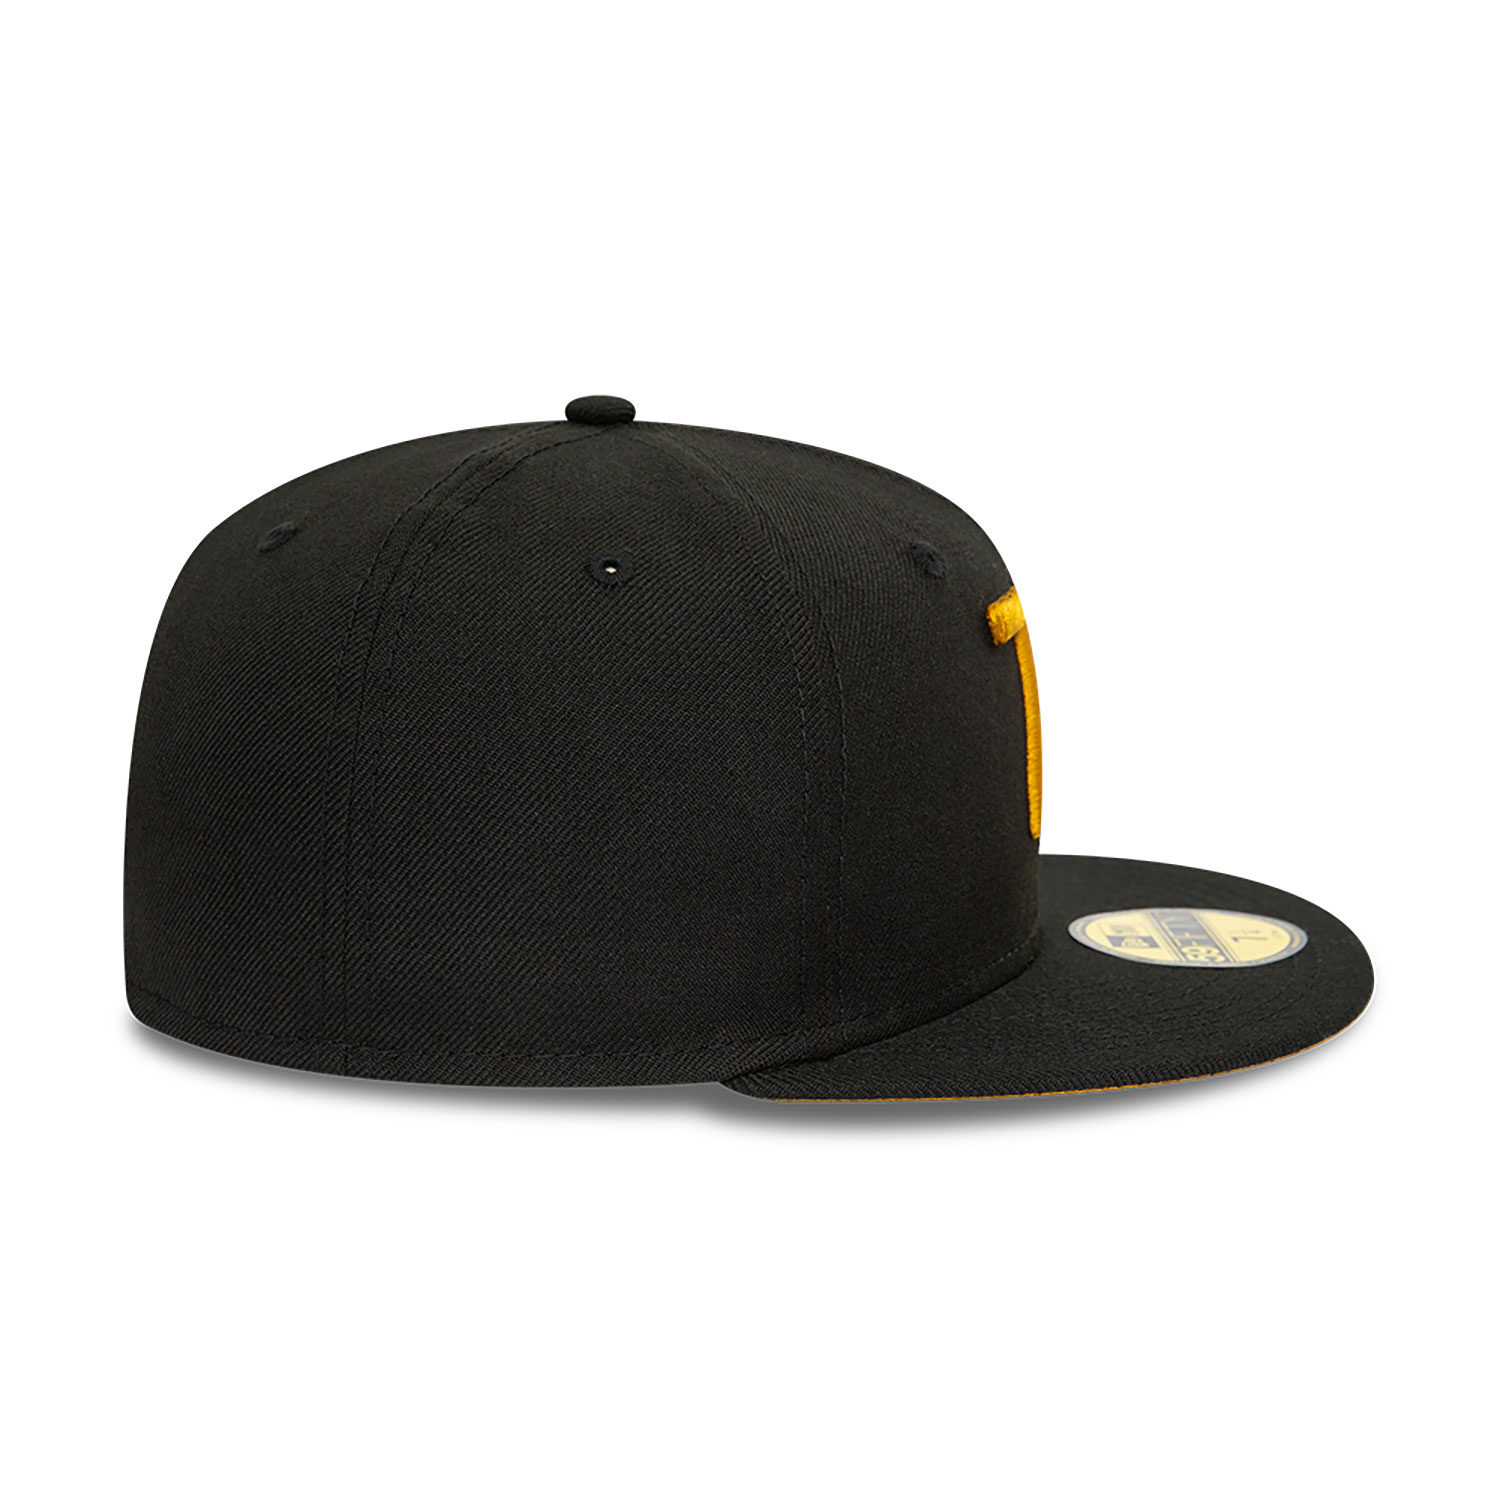 New Era 7 1/4 59FIFTY Day Black 59FIFTY Fitted Cap